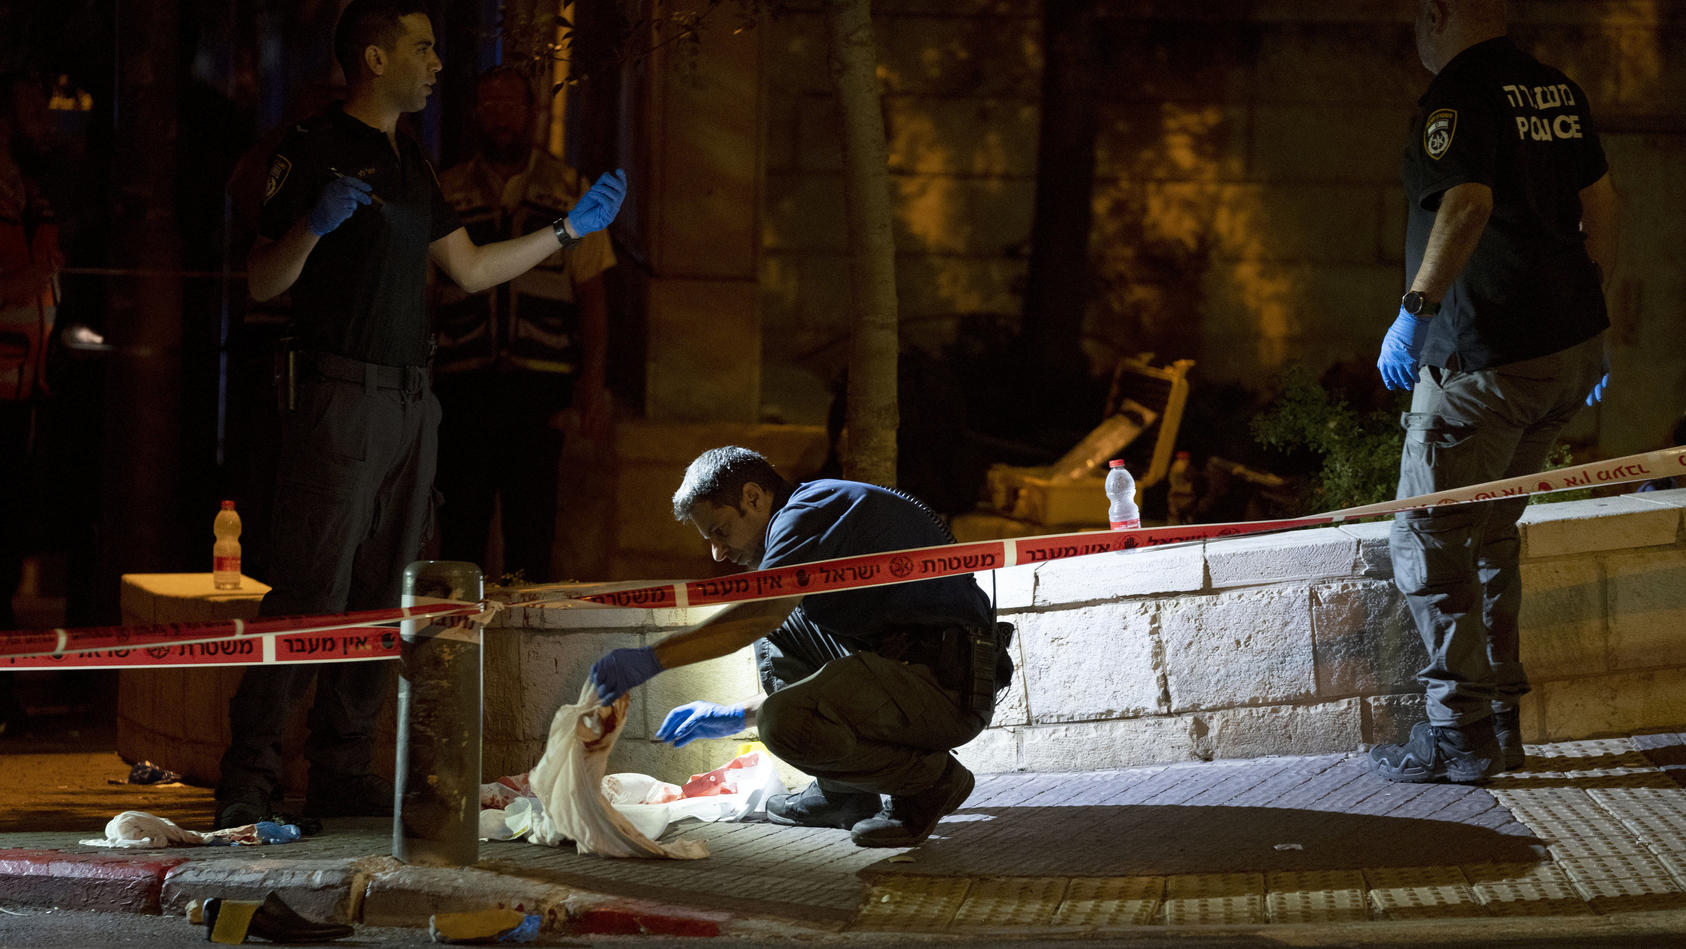 Israeli police crime scene investigators work at the scene of a shooting attack that wounded several Israelis near the Old City of Jerusalem, early Sunday, Aug. 14, 2022. Israeli police and medics say a gunman opened fire at a bus in a suspected Pale